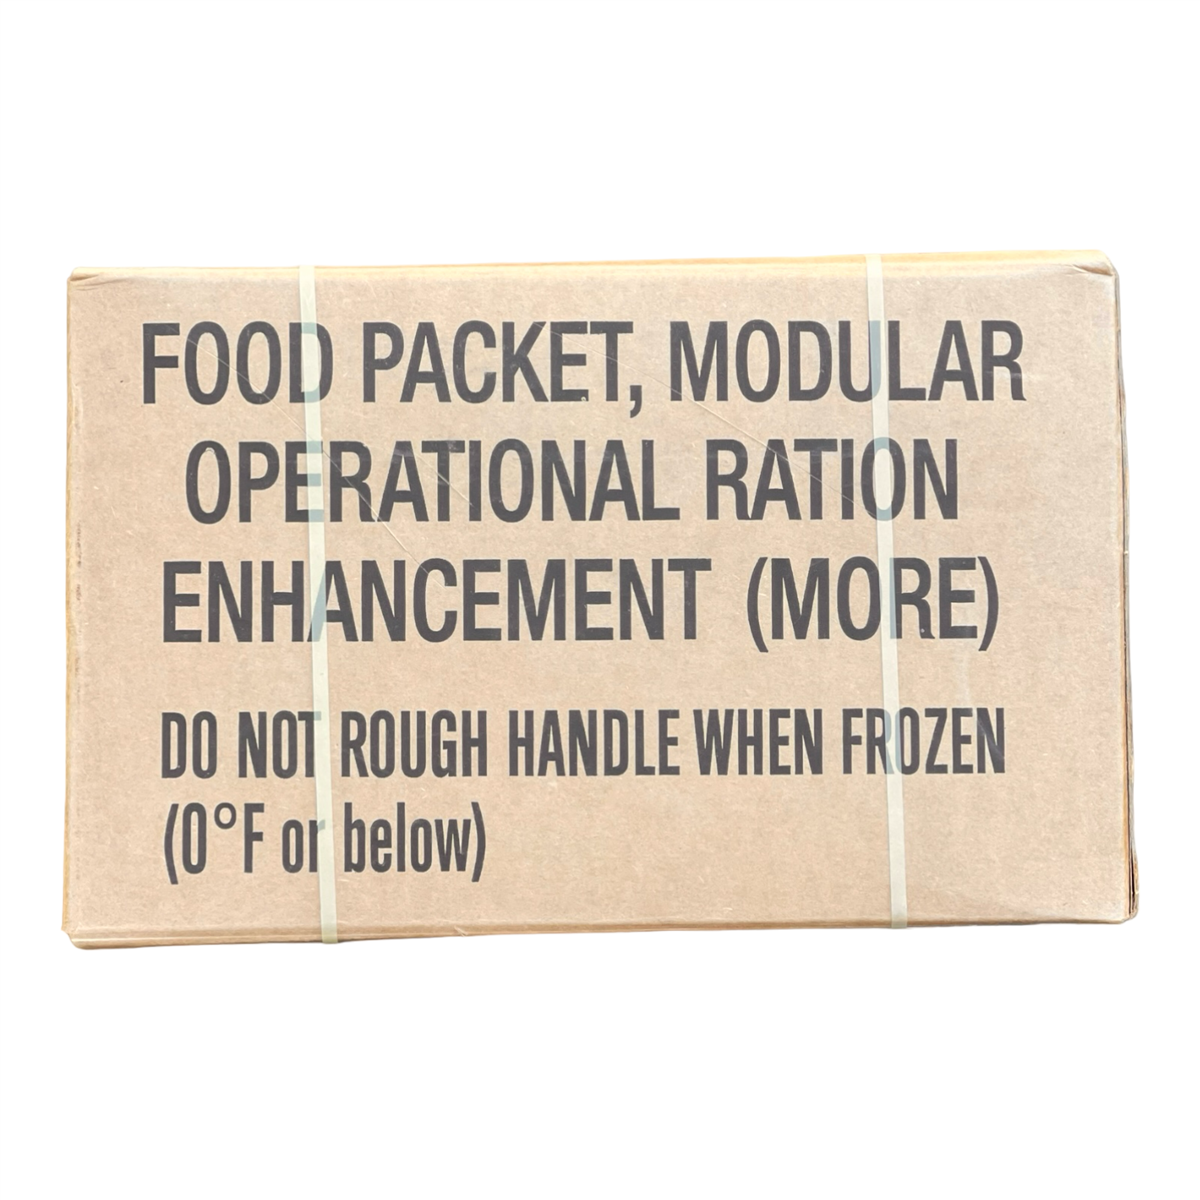 Modular Operational Ration Enhancement (MORE) Type I: High Altitude/Cold Weather